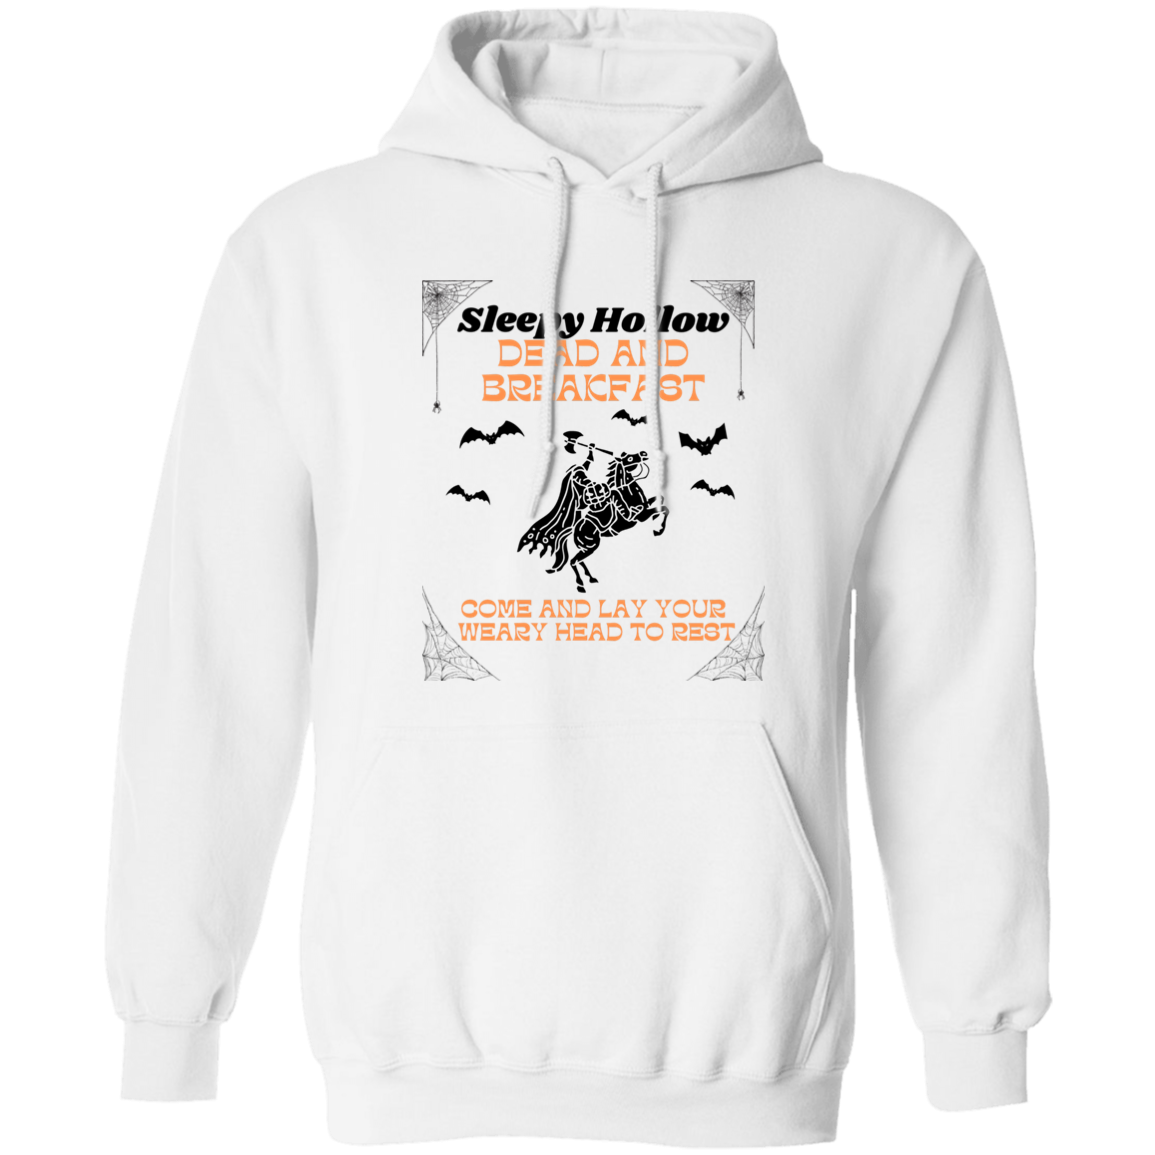 Get trendy with Sleepy Hollow Dead and Breakfast  Pullover Hoodie -  available at Good Gift Company. Grab yours for $27.95 today!